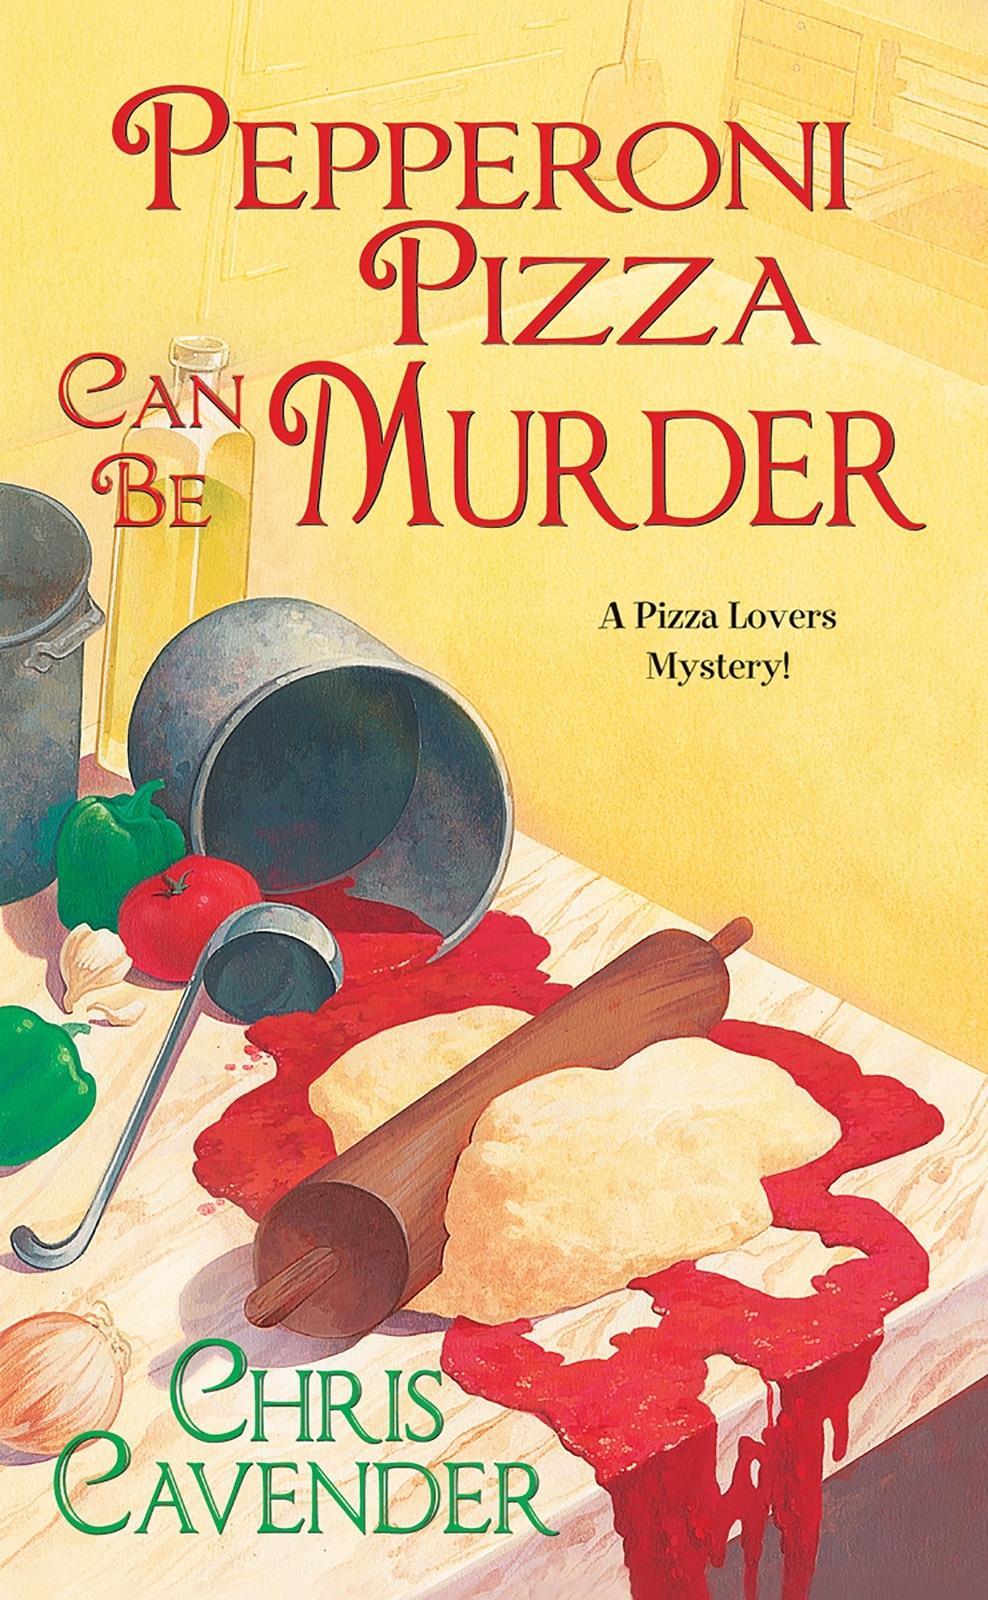 Pepperoni Pizza Can be Murder: A Pizza Lover's Mystery Hardcover Book